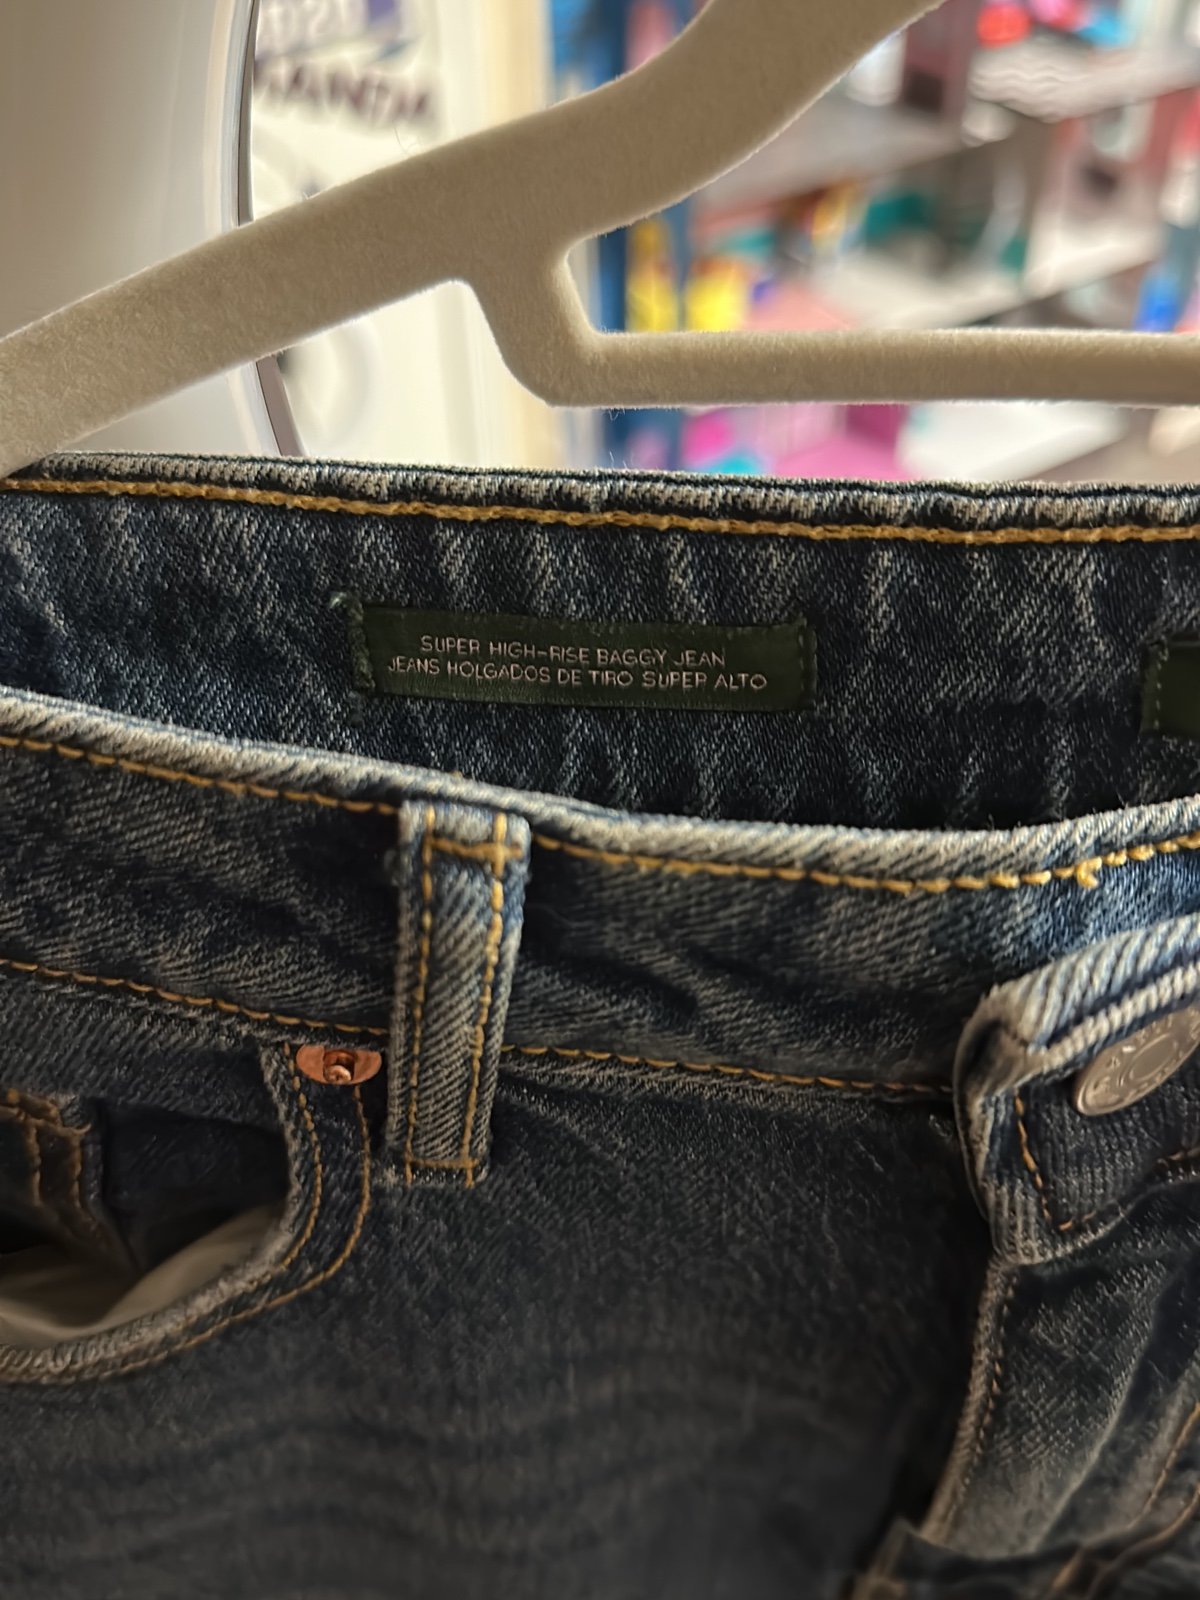 High quality wild fable jeans gsCaWf7F3 for sale